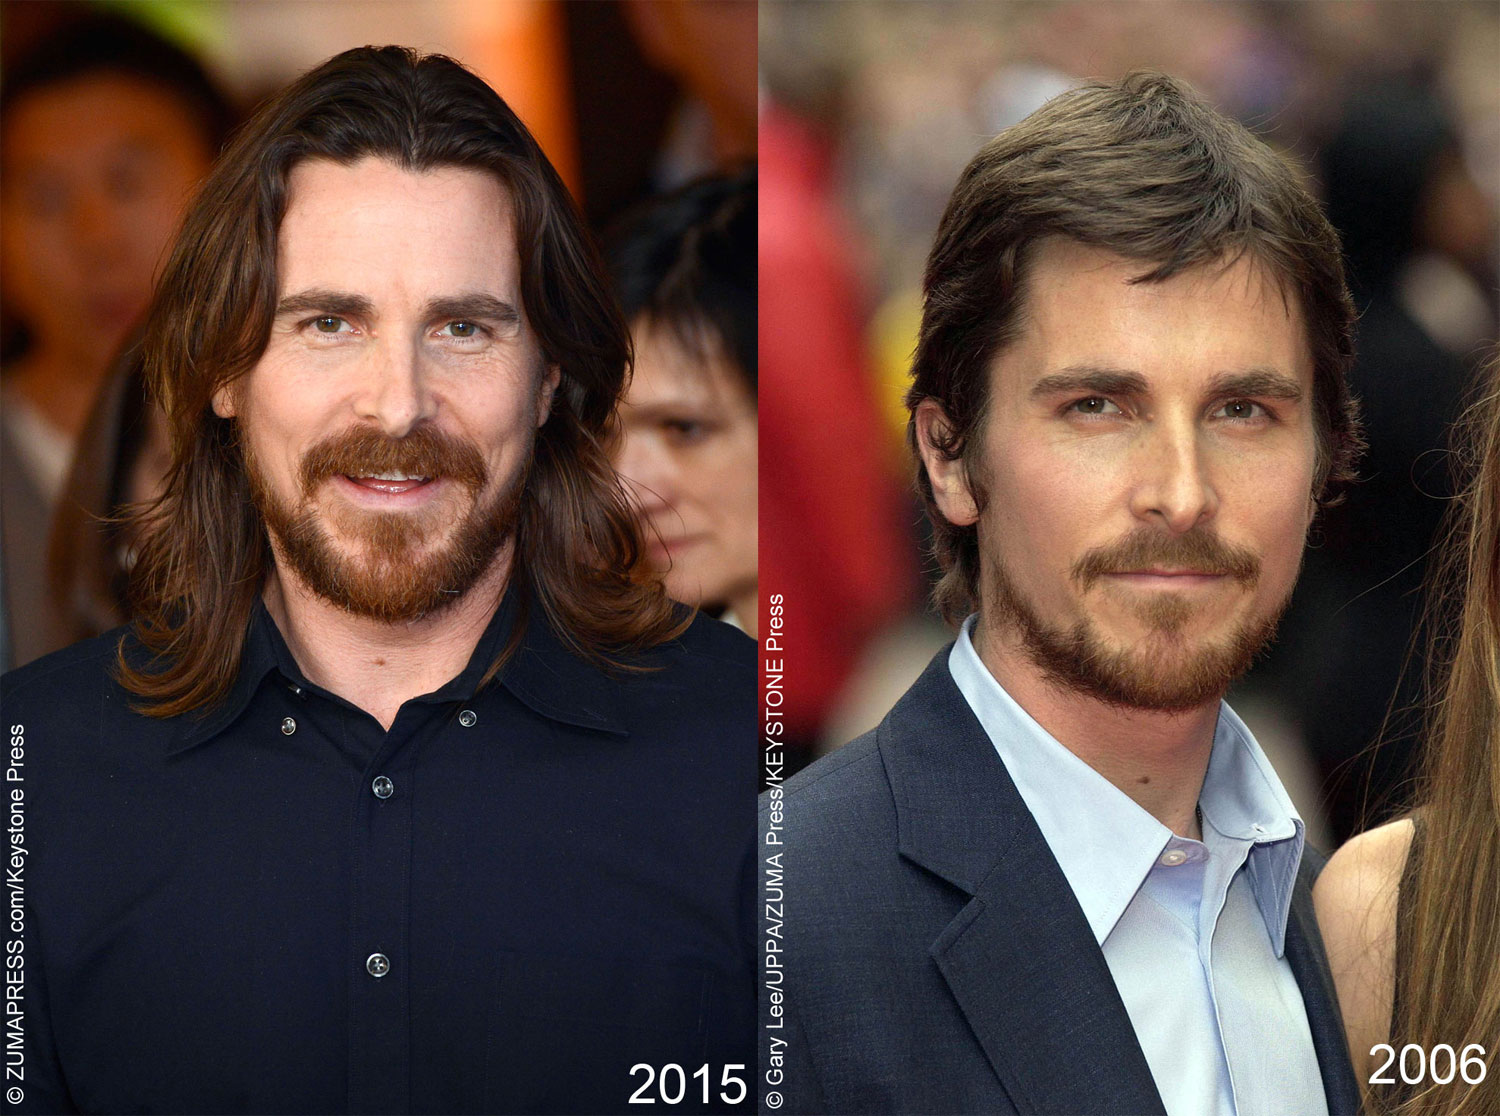 Christian Bale has changed a bit since he made his movie debut at age 13, but the Dark Knight star has proven time and time again that, like his acting, he is ageless. Christian keeps young by regularly working out and eating well. Occasionally he’ll gain a few extra pounds, but only for a role.